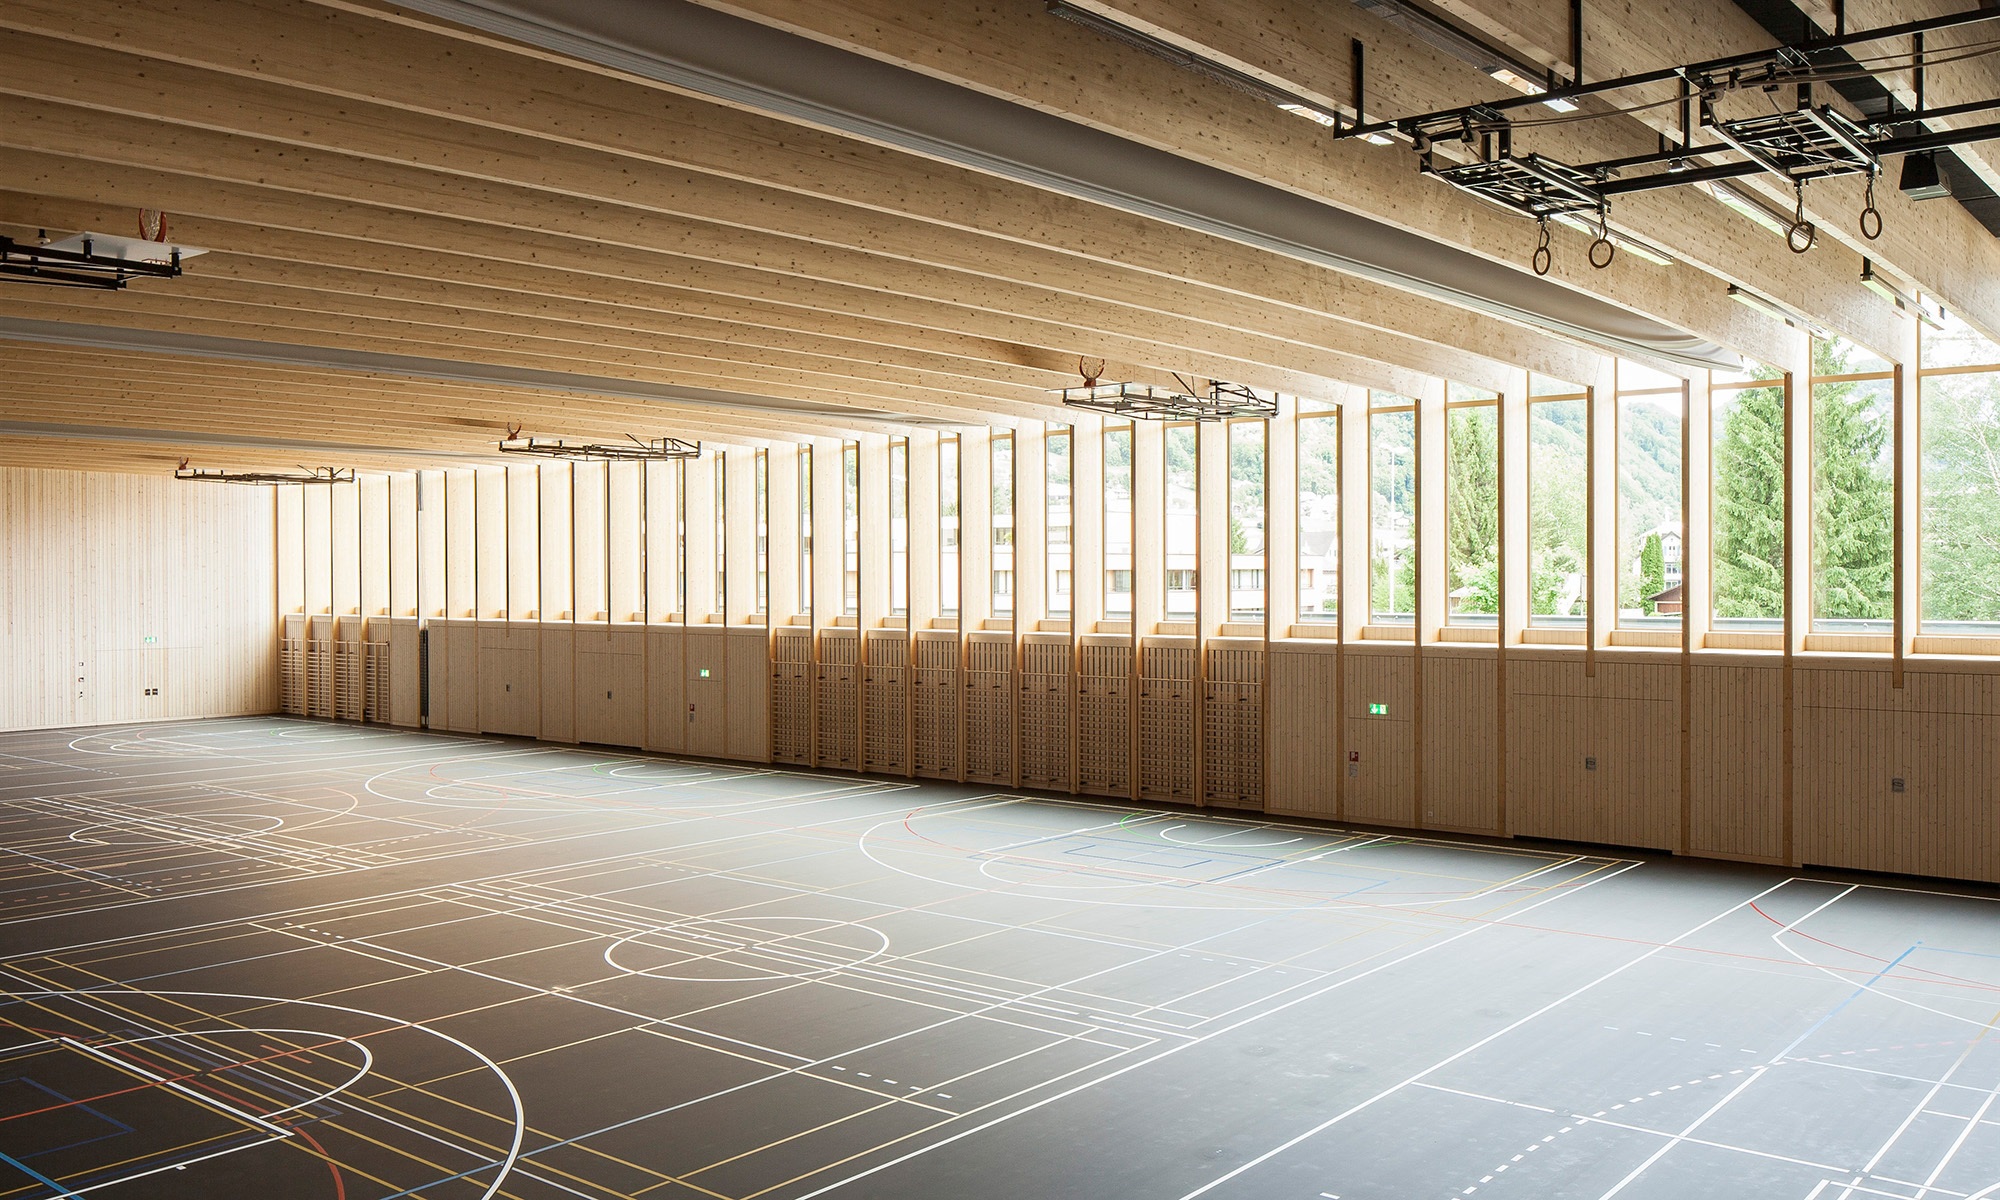 The photograph shows the wooden wall and ceiling structure in the Sargans sports hall